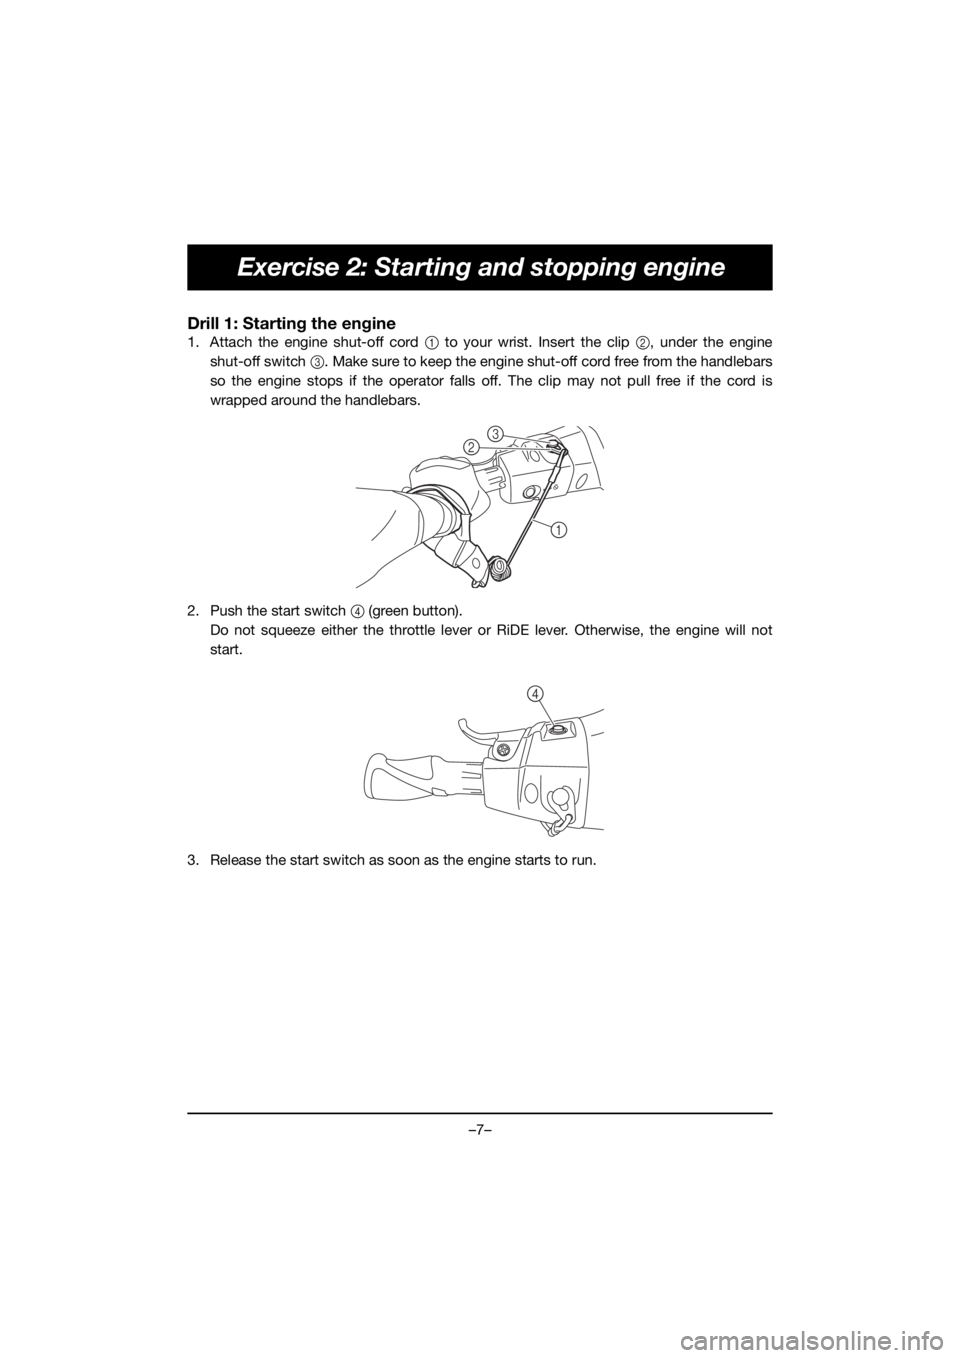 YAMAHA FJR1300 2019  Manual de utilização (in Portuguese) –7–
Exercise 2: Starting and stopping engine
Drill 1: Starting the engine
1. Attach the engine shut-off cord 1 to your wrist. Insert the clip 2, under the engine
shut-off switch 3. Make sure to ke